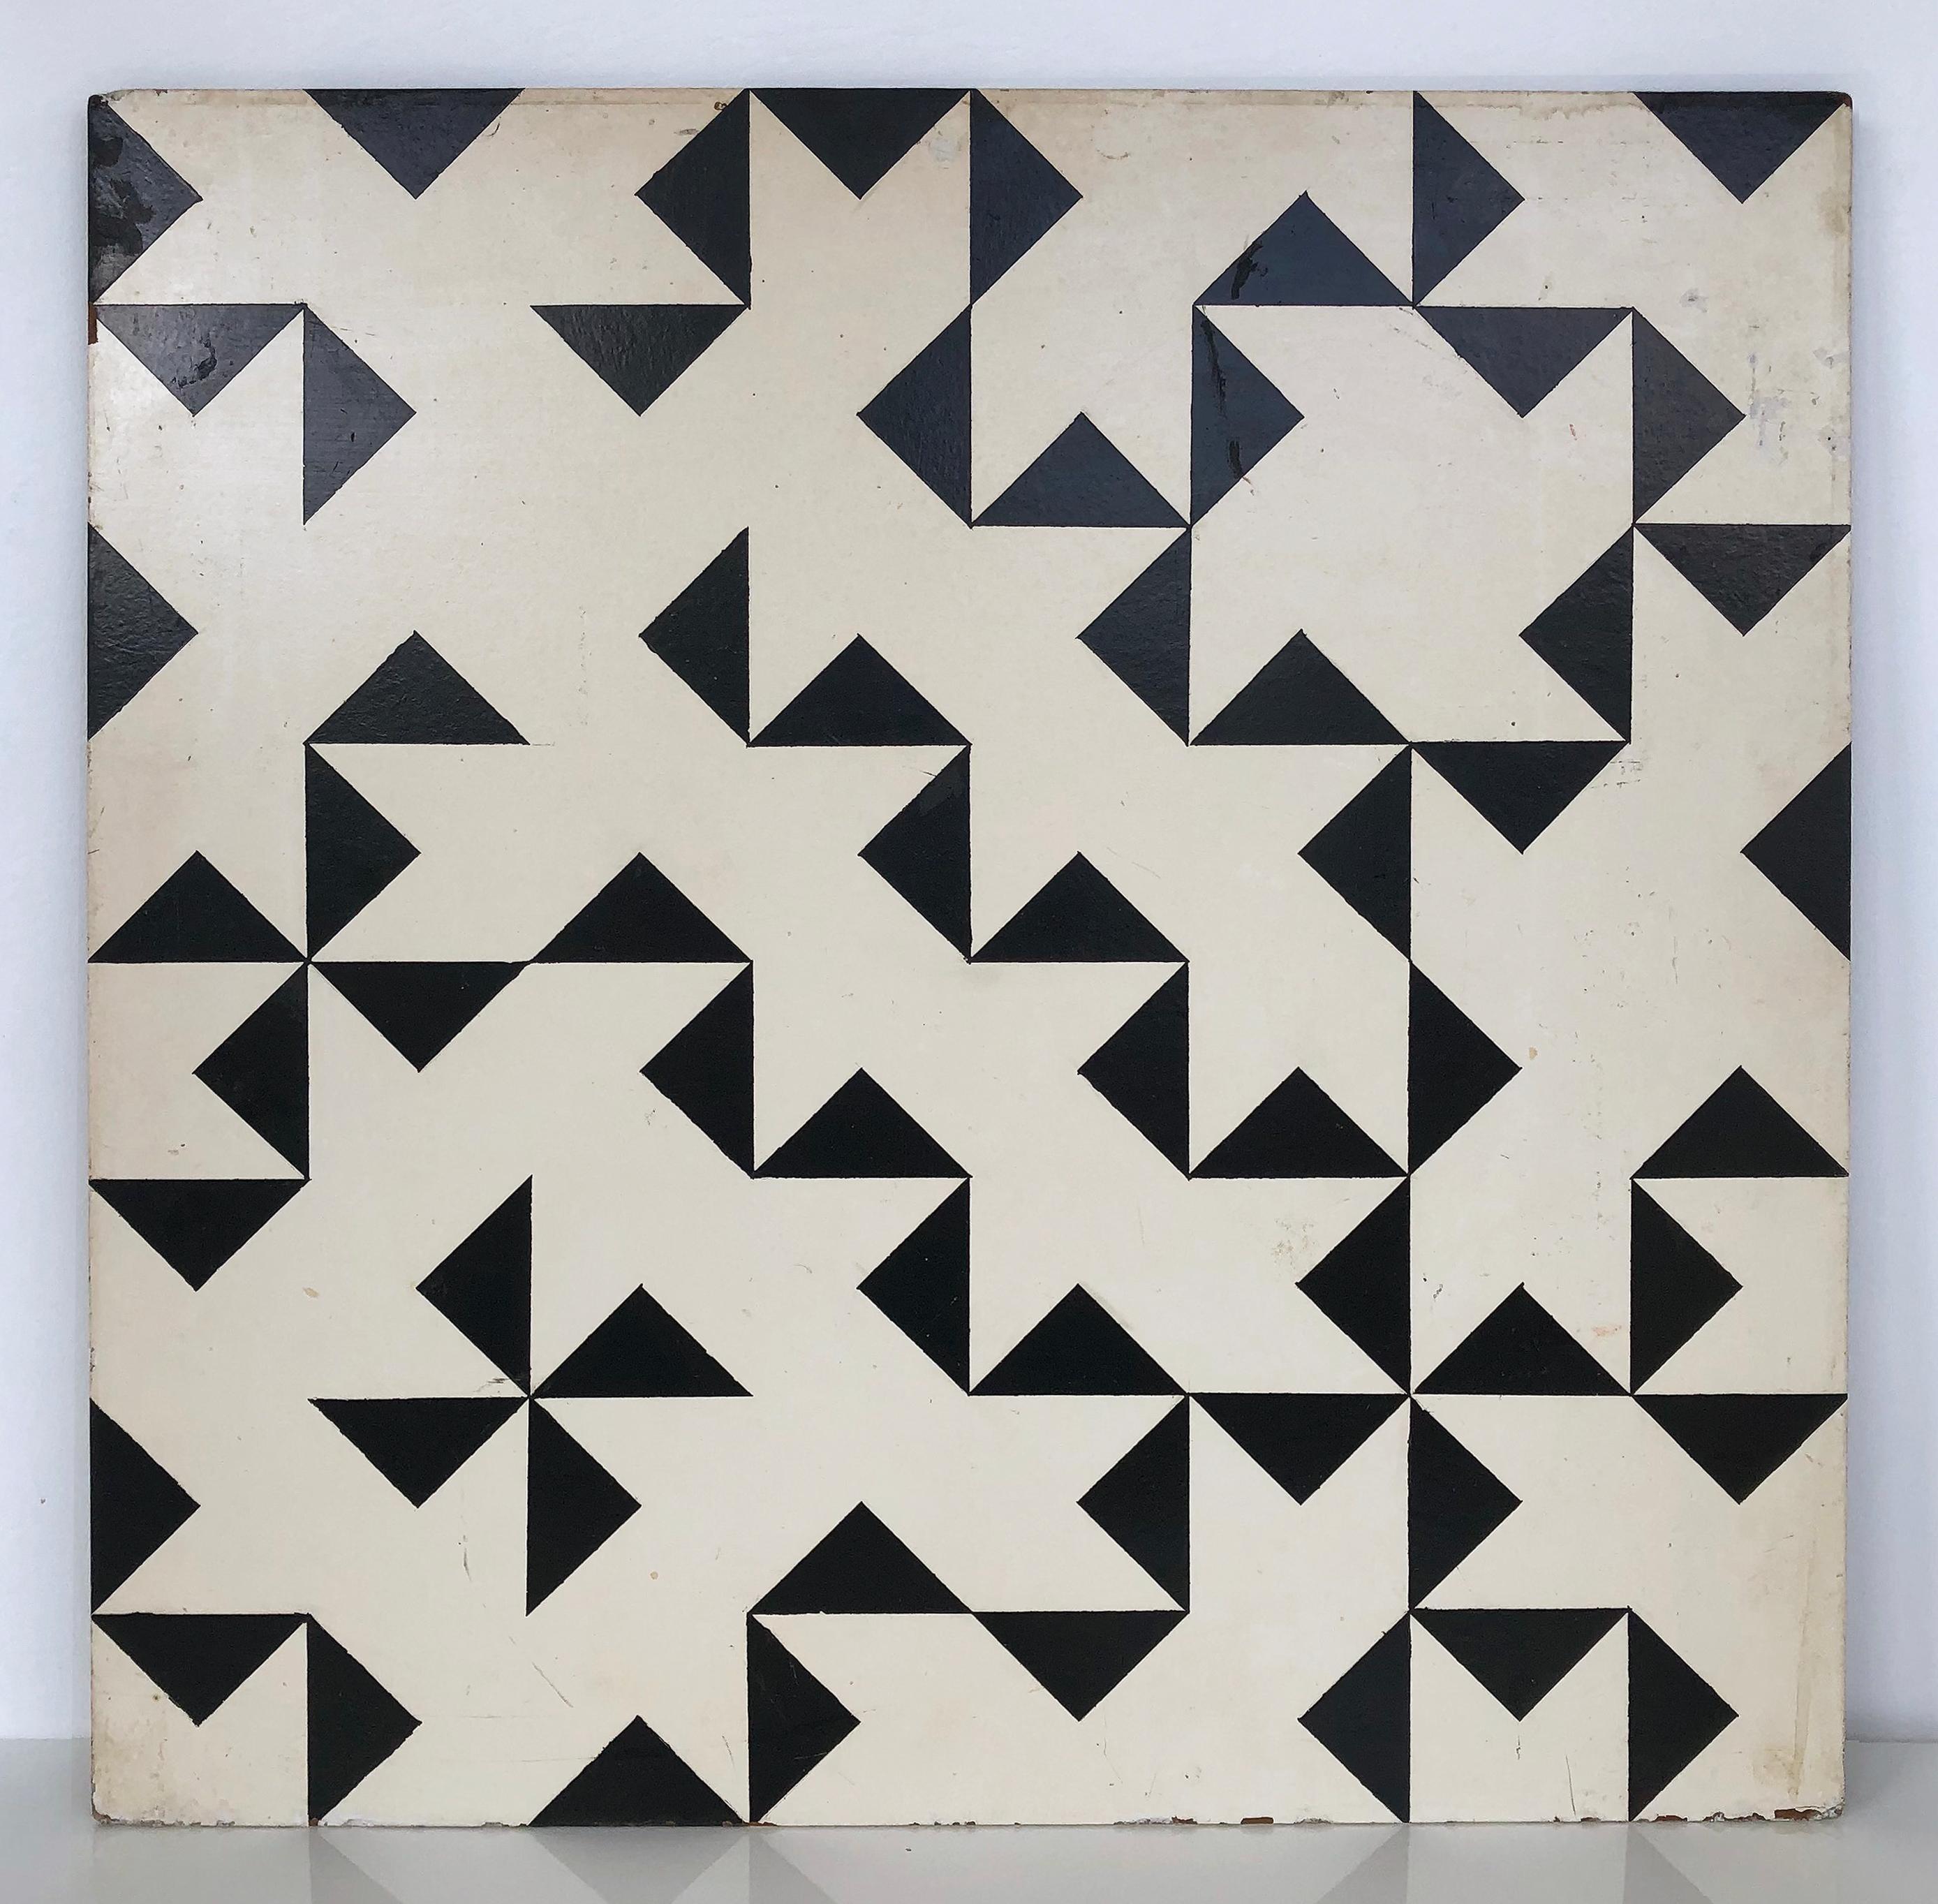 Ronald R. brown geometric abstract optical art painting, Signed 1990

Offered for sale from the artist's estate is a Ronald R. Brown geometric optical art painting on panel c.1990, The painting is wired and ready to hang. Also available is another